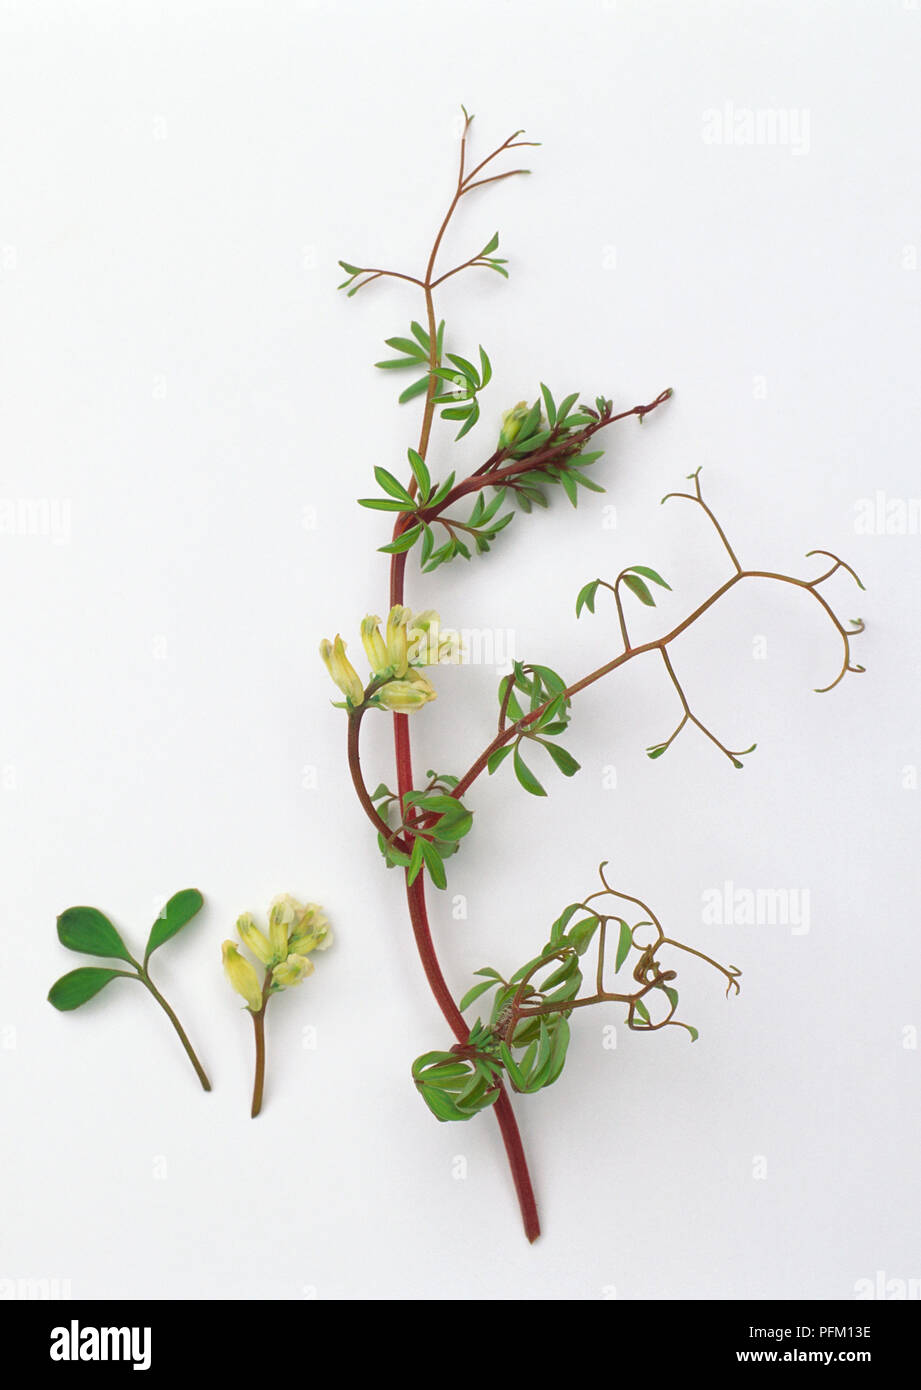 Ceratocapnos claviculata (Climbing corydalis), stem with flowers and leaves Stock Photo